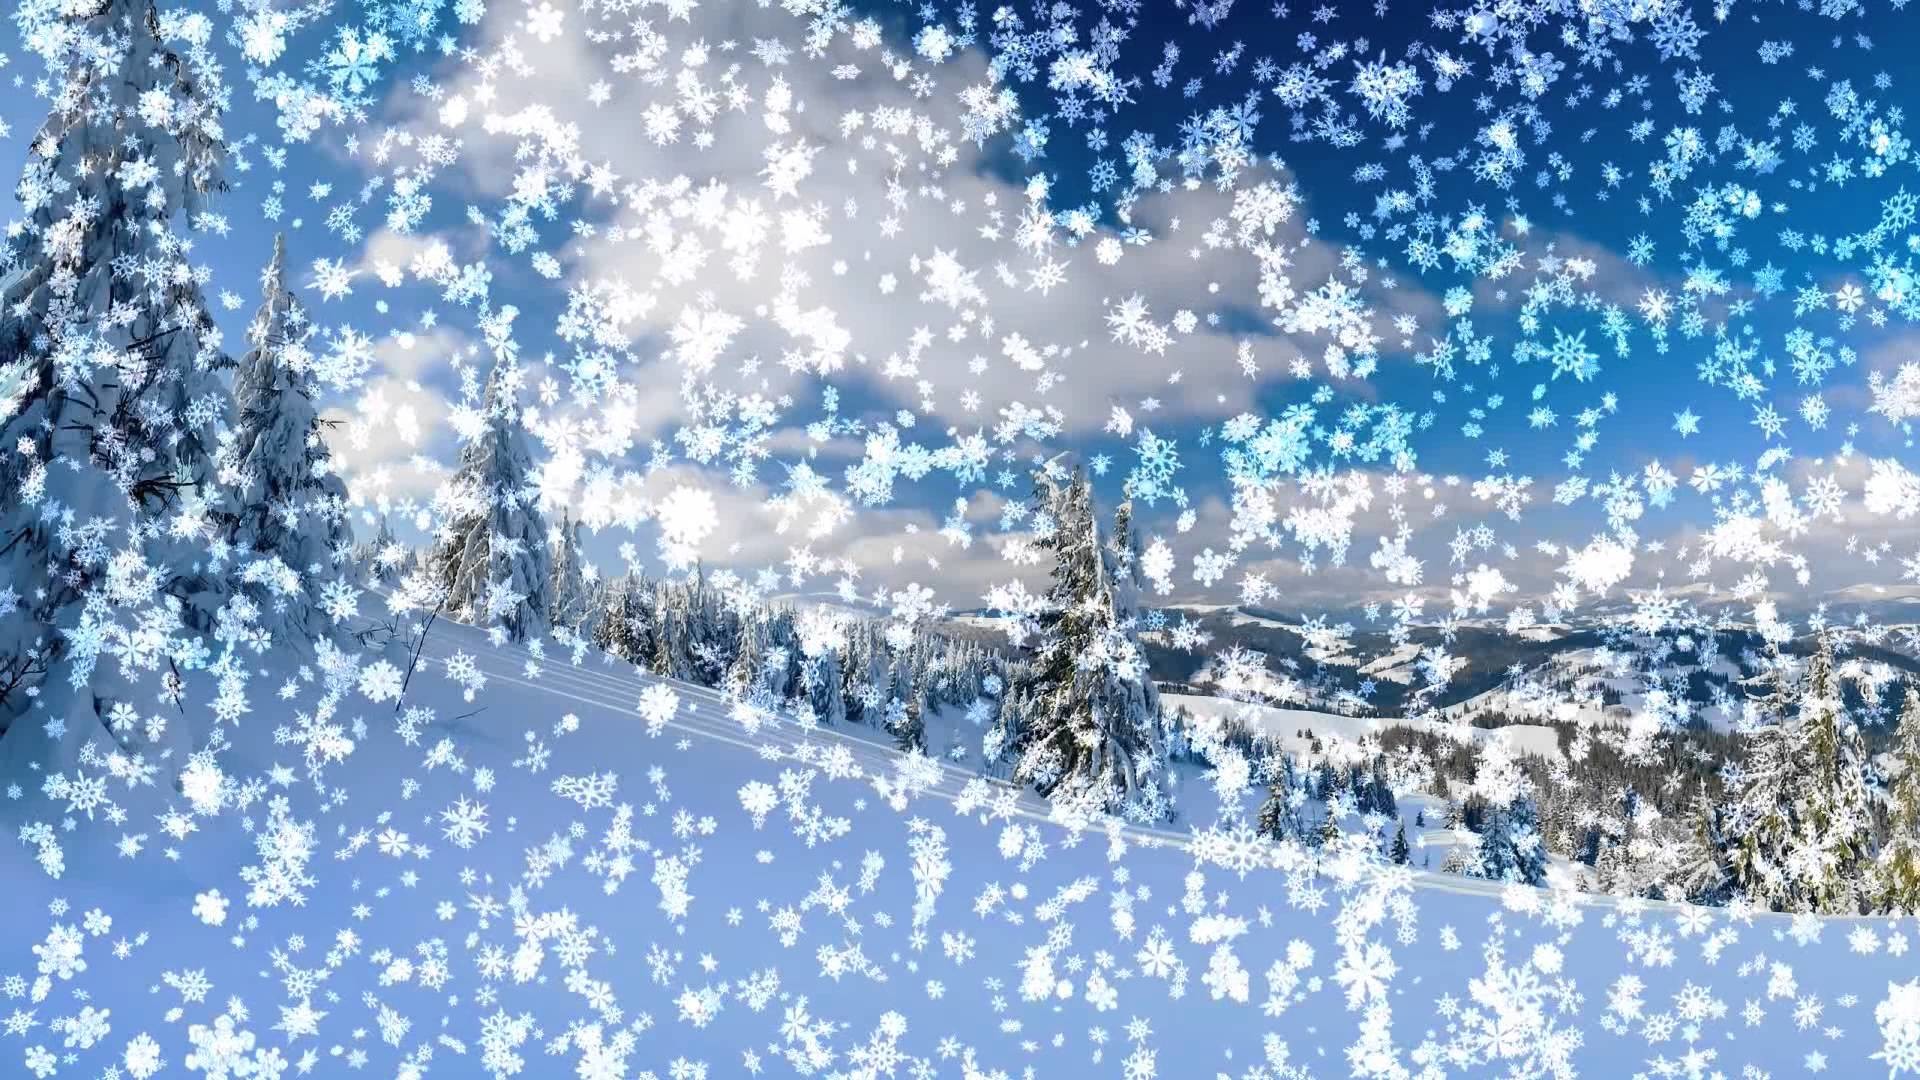 Live Snow Falling Wallpaper (54+ images)